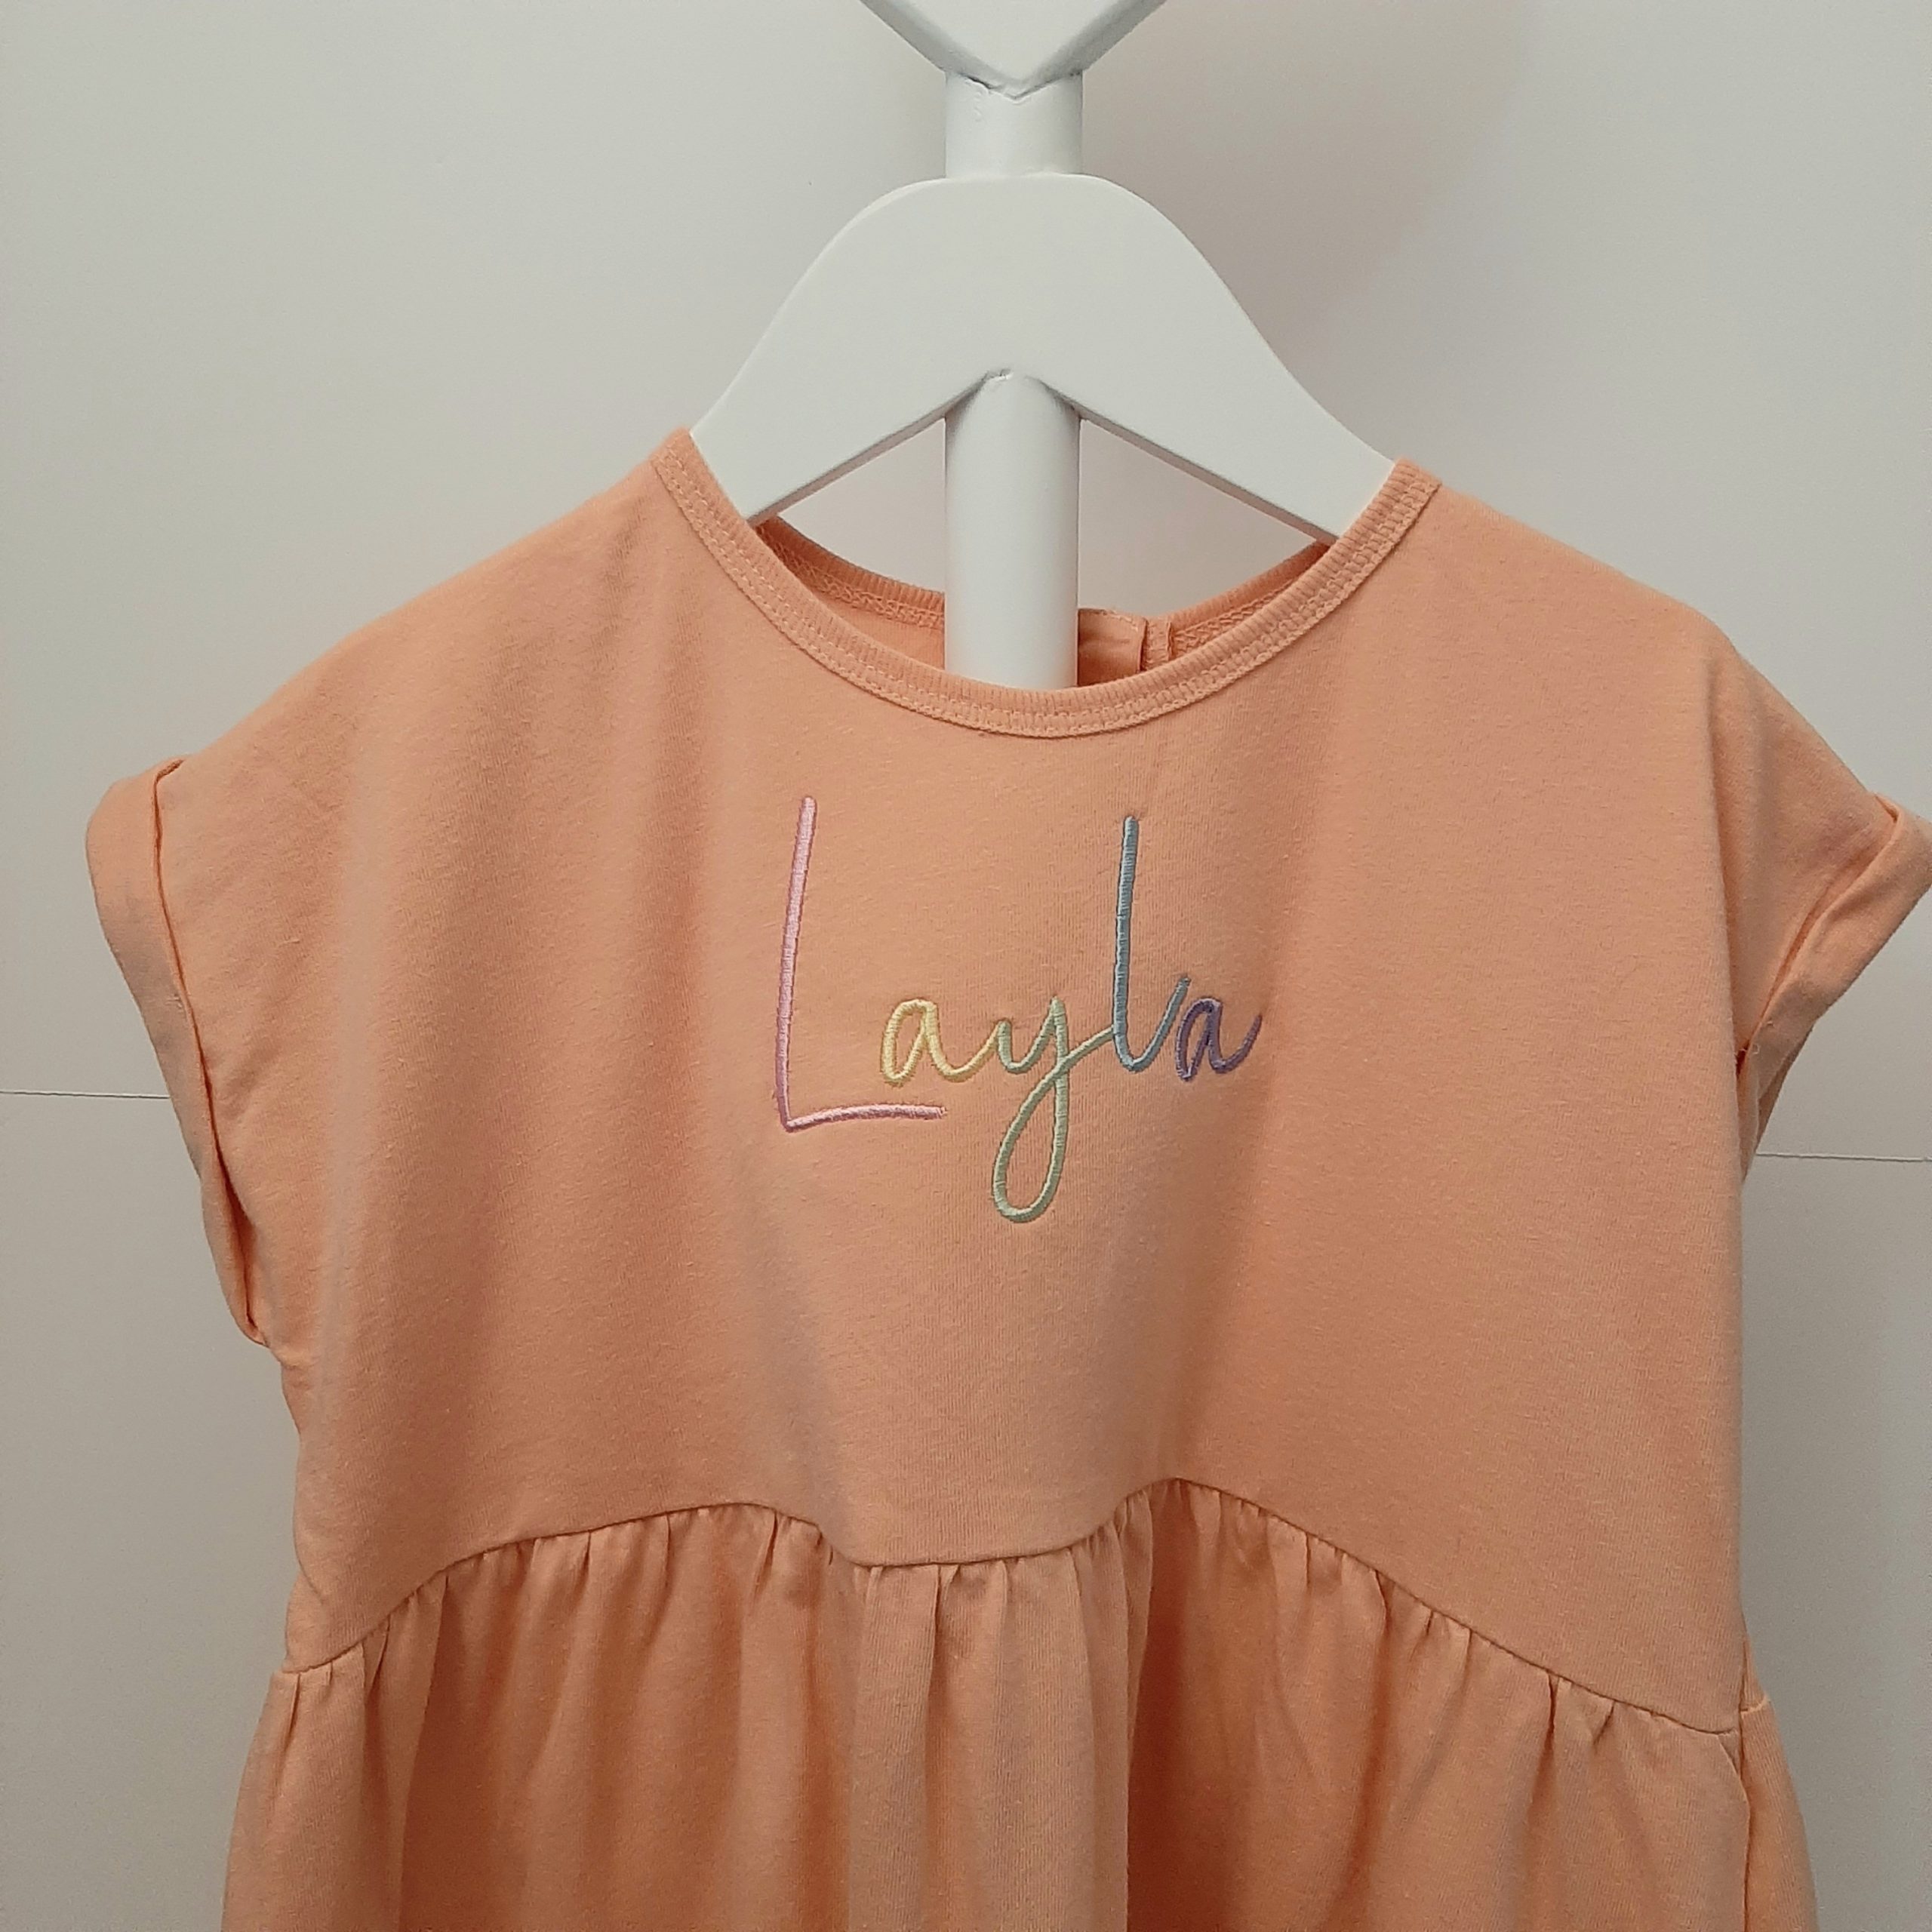 dusky pink cotton summer dress with rainbow name